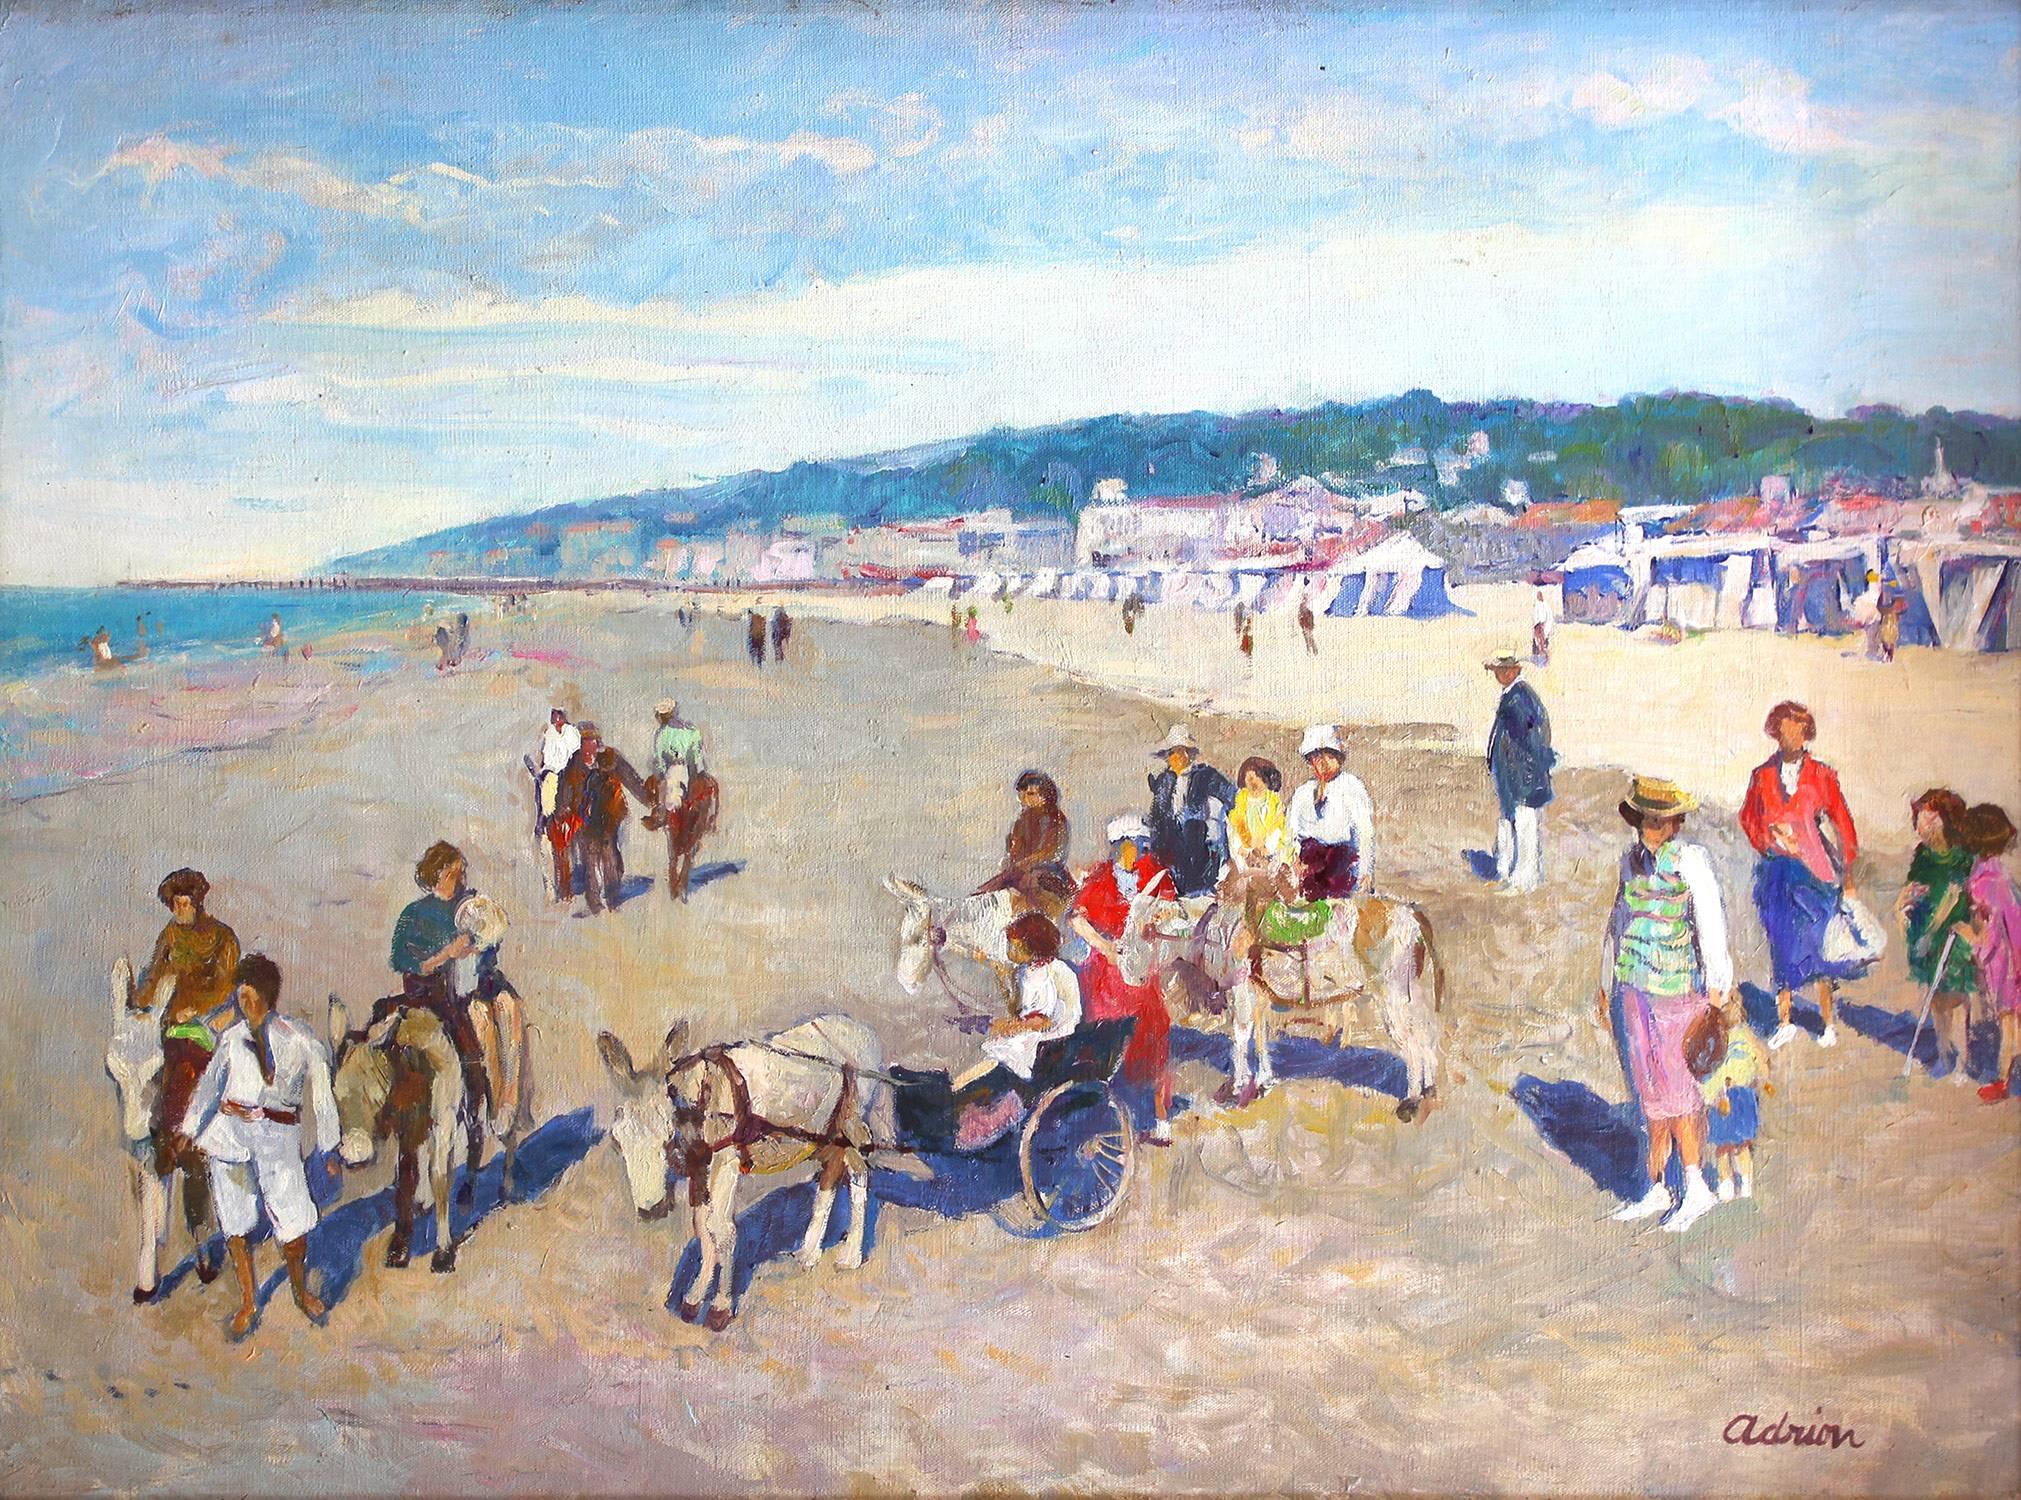 Cote D'Azur Beach Scene - Painting by Lucien Adrion